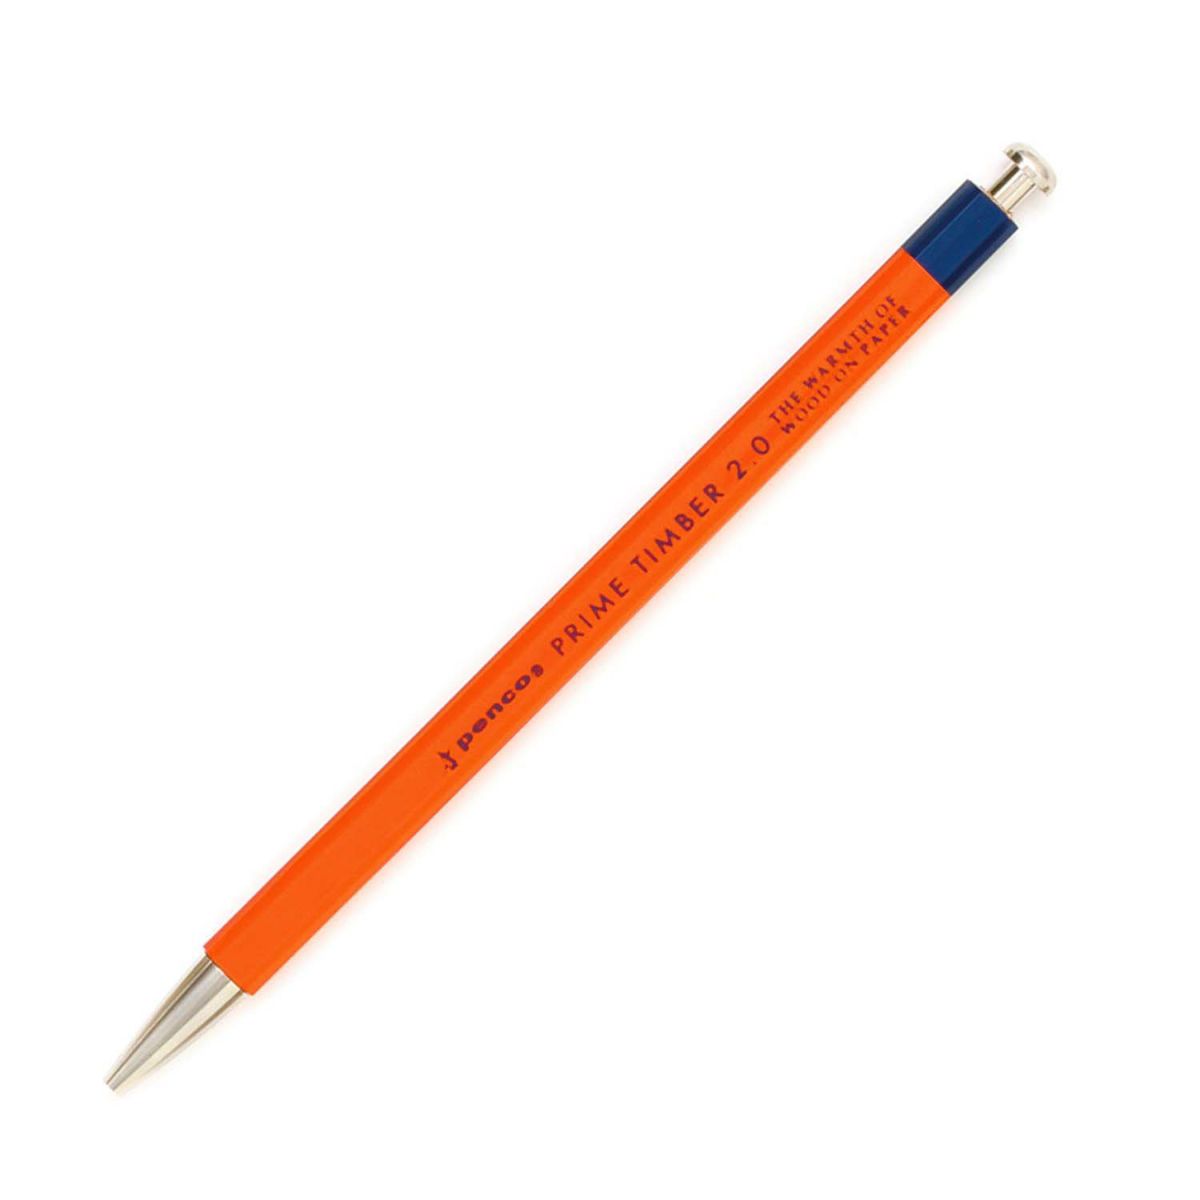 Prime Timber Pencil 2.0 // All Colors